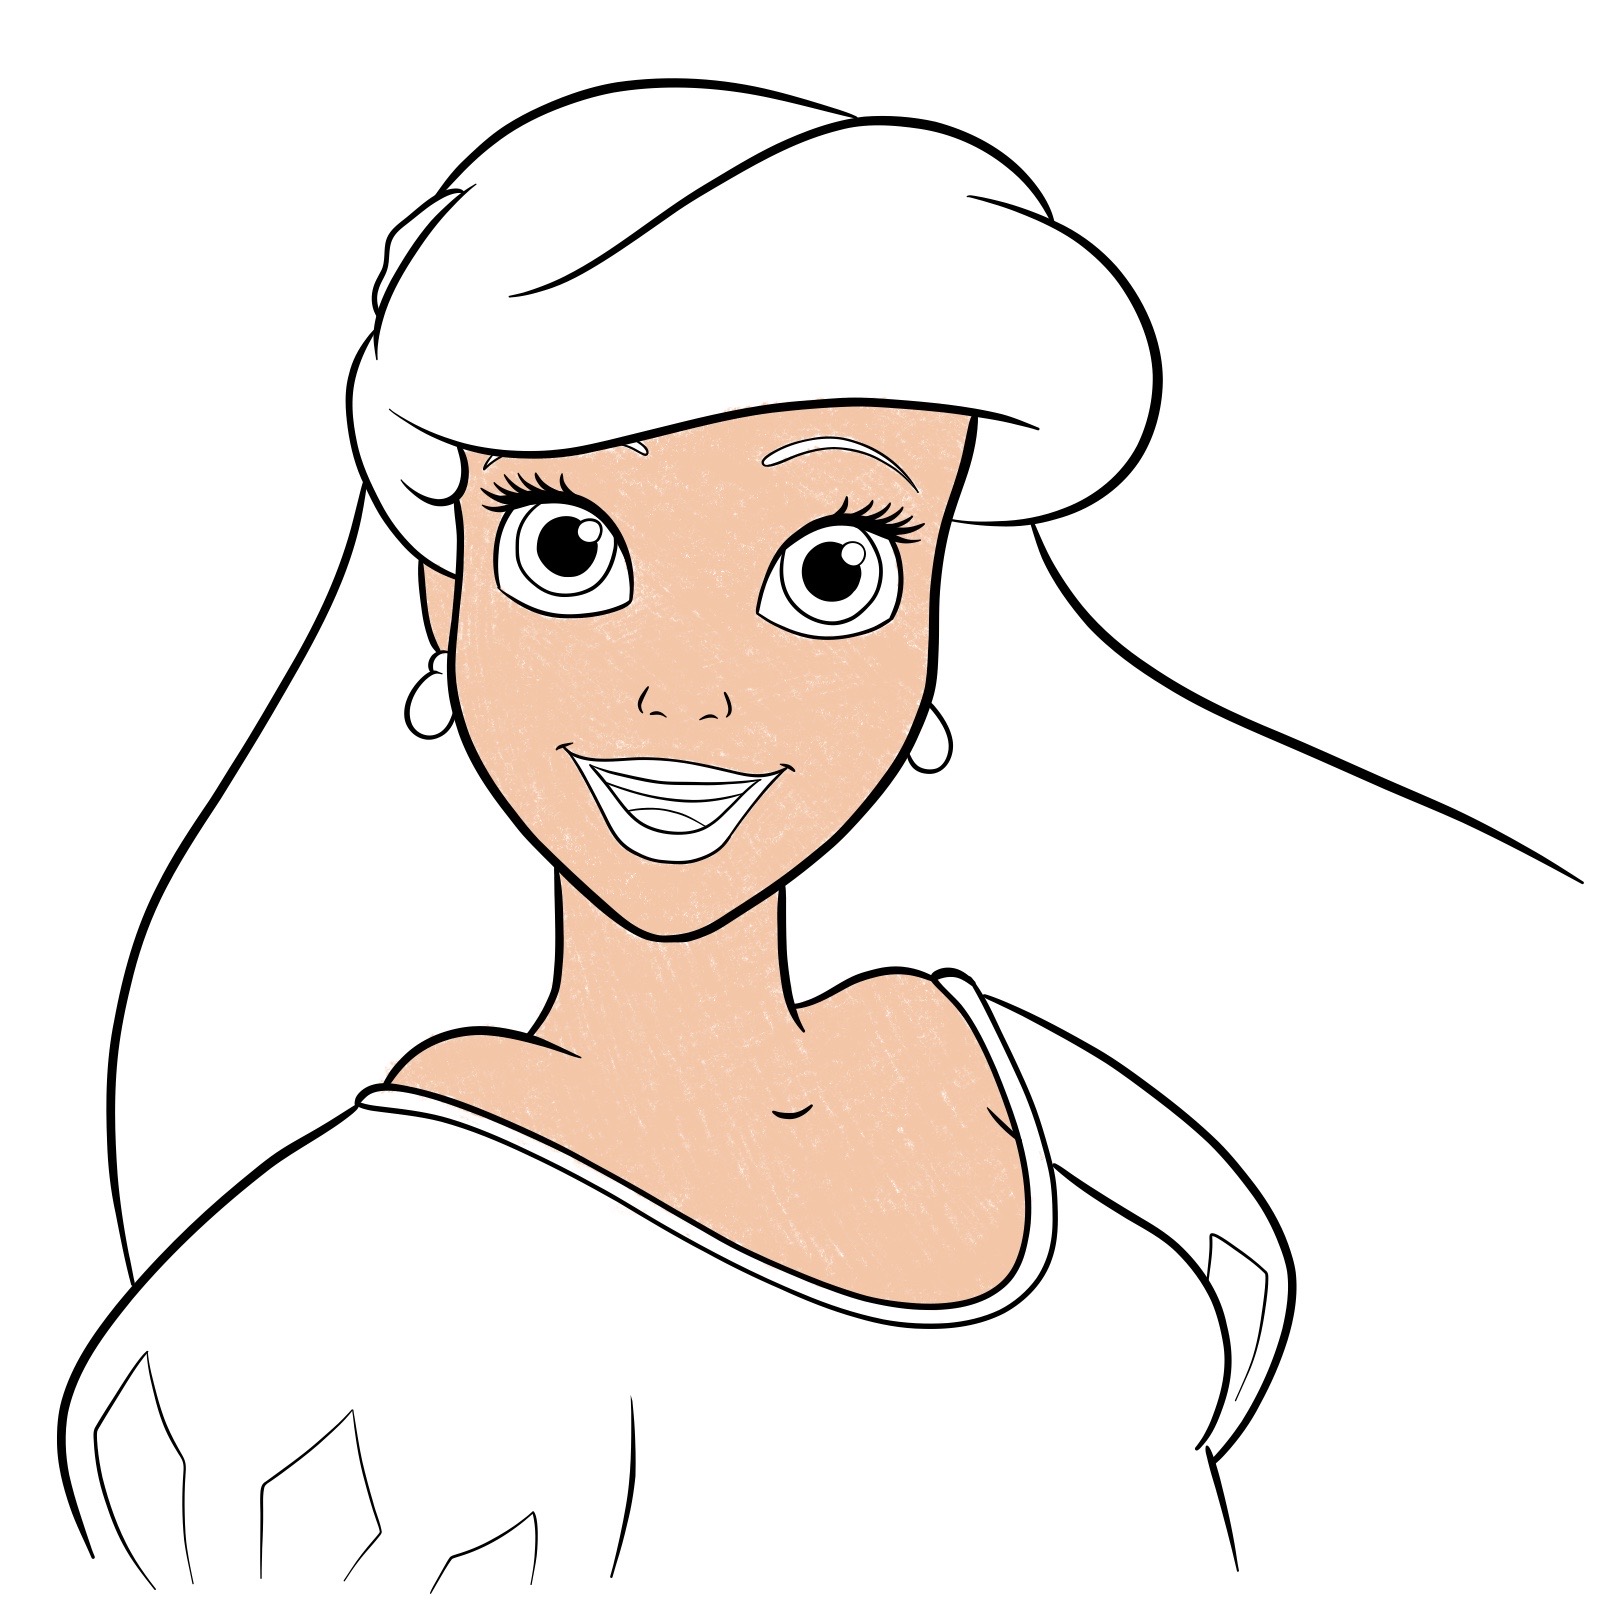 How to draw Ariel's face - The Little Mermaid - step 29